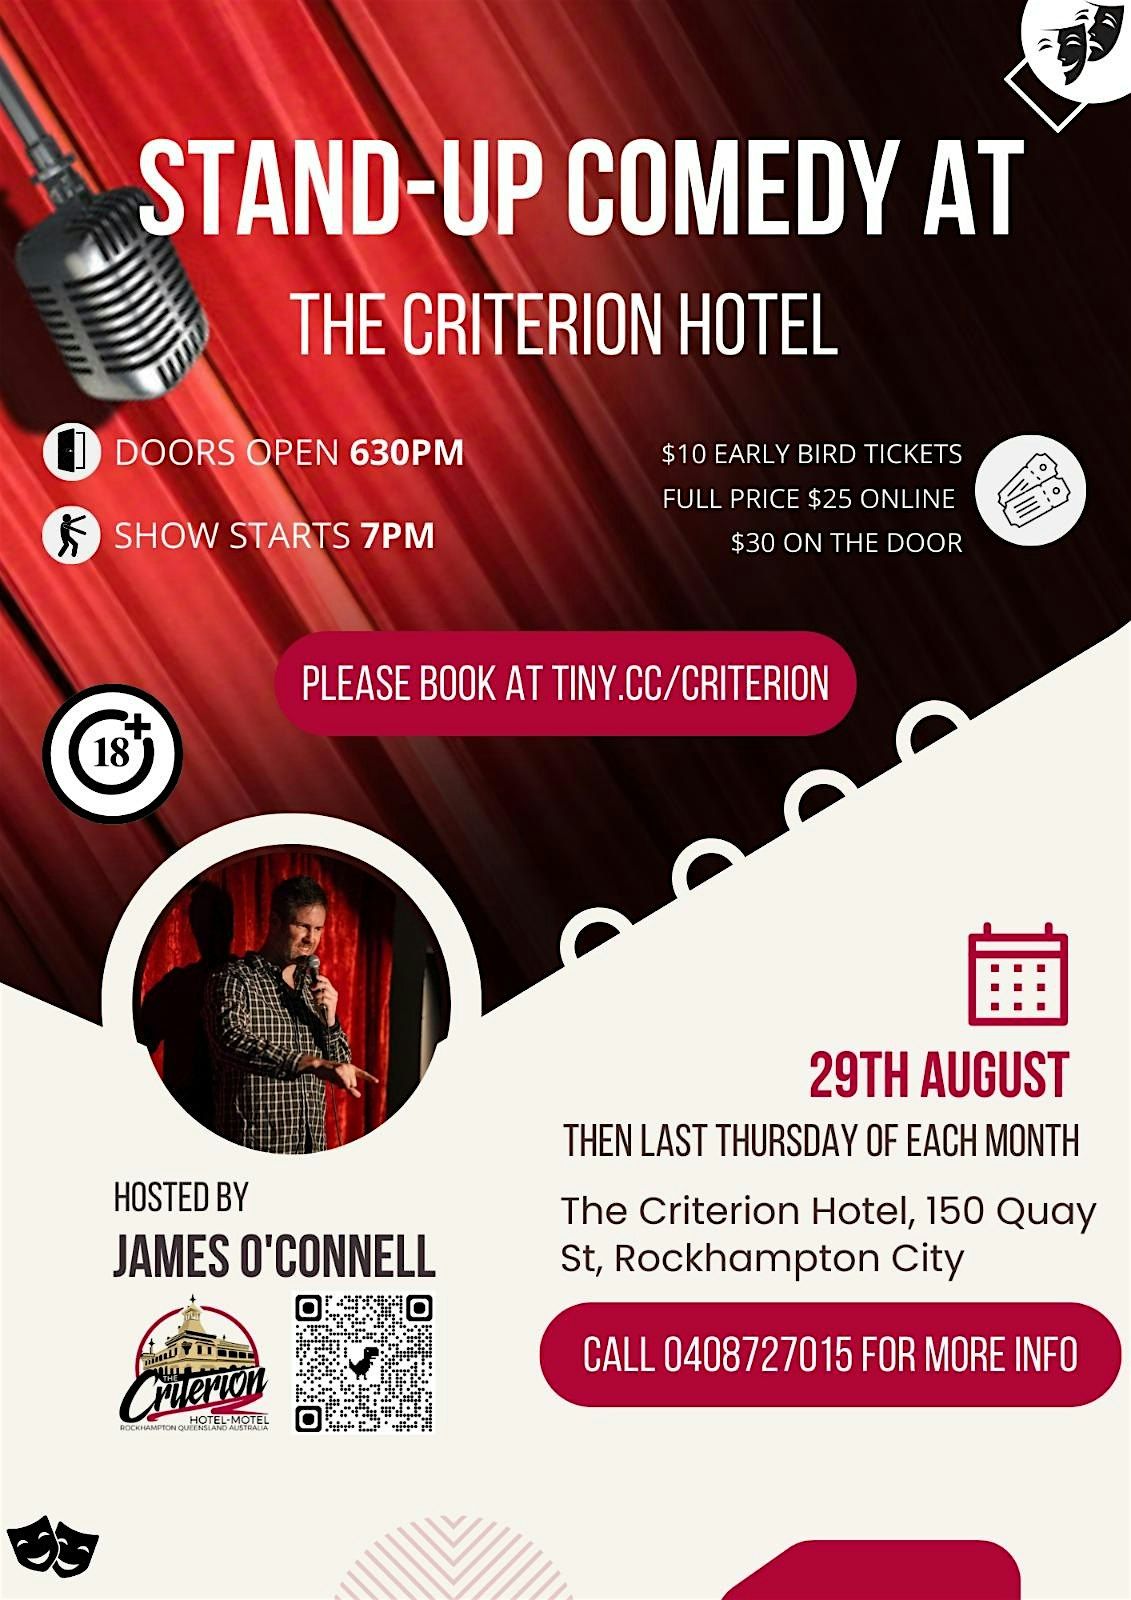 Stand-up Comedy at The Criterion Hotel